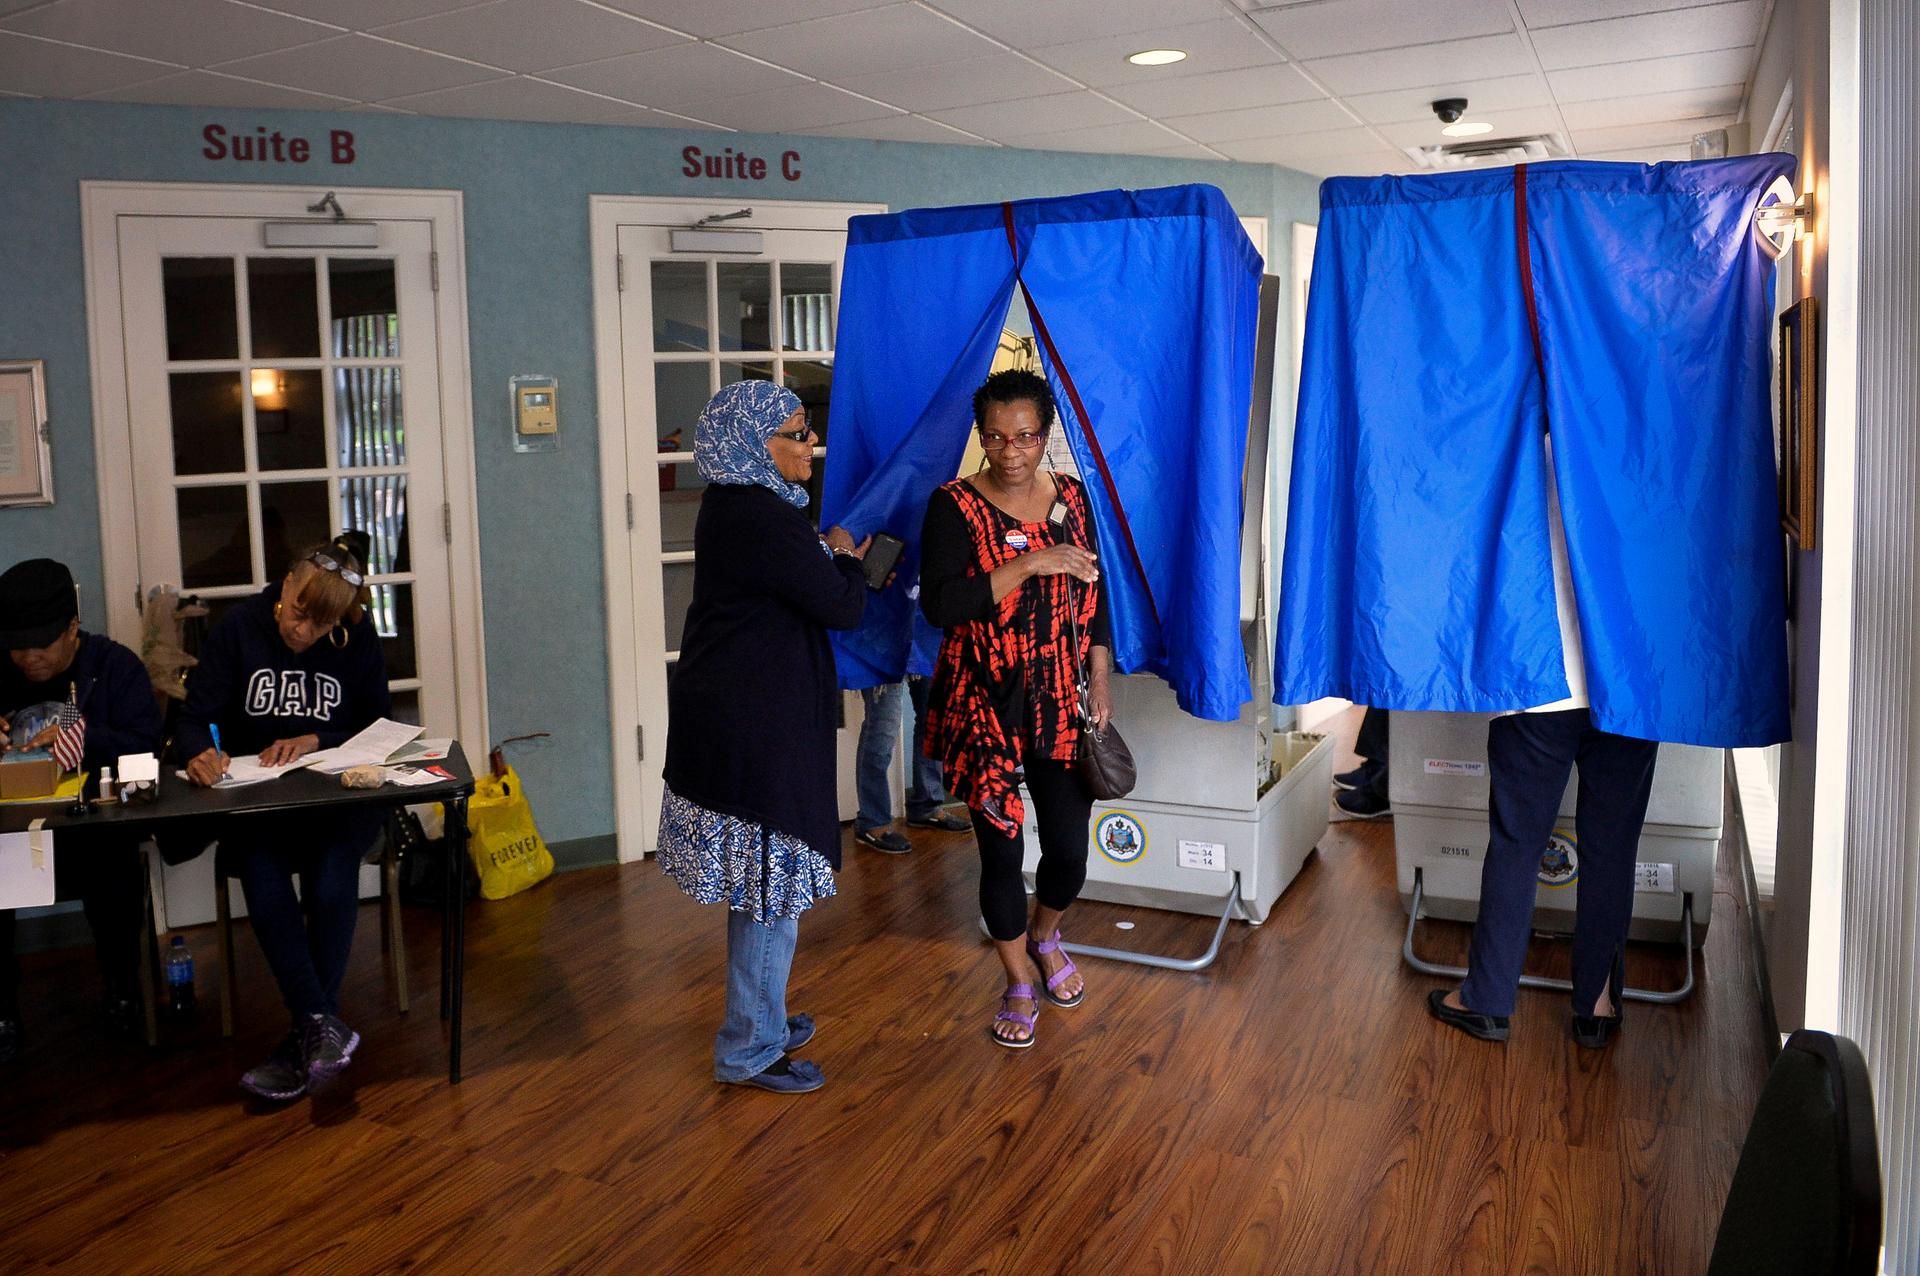 A voter exits the voting booth